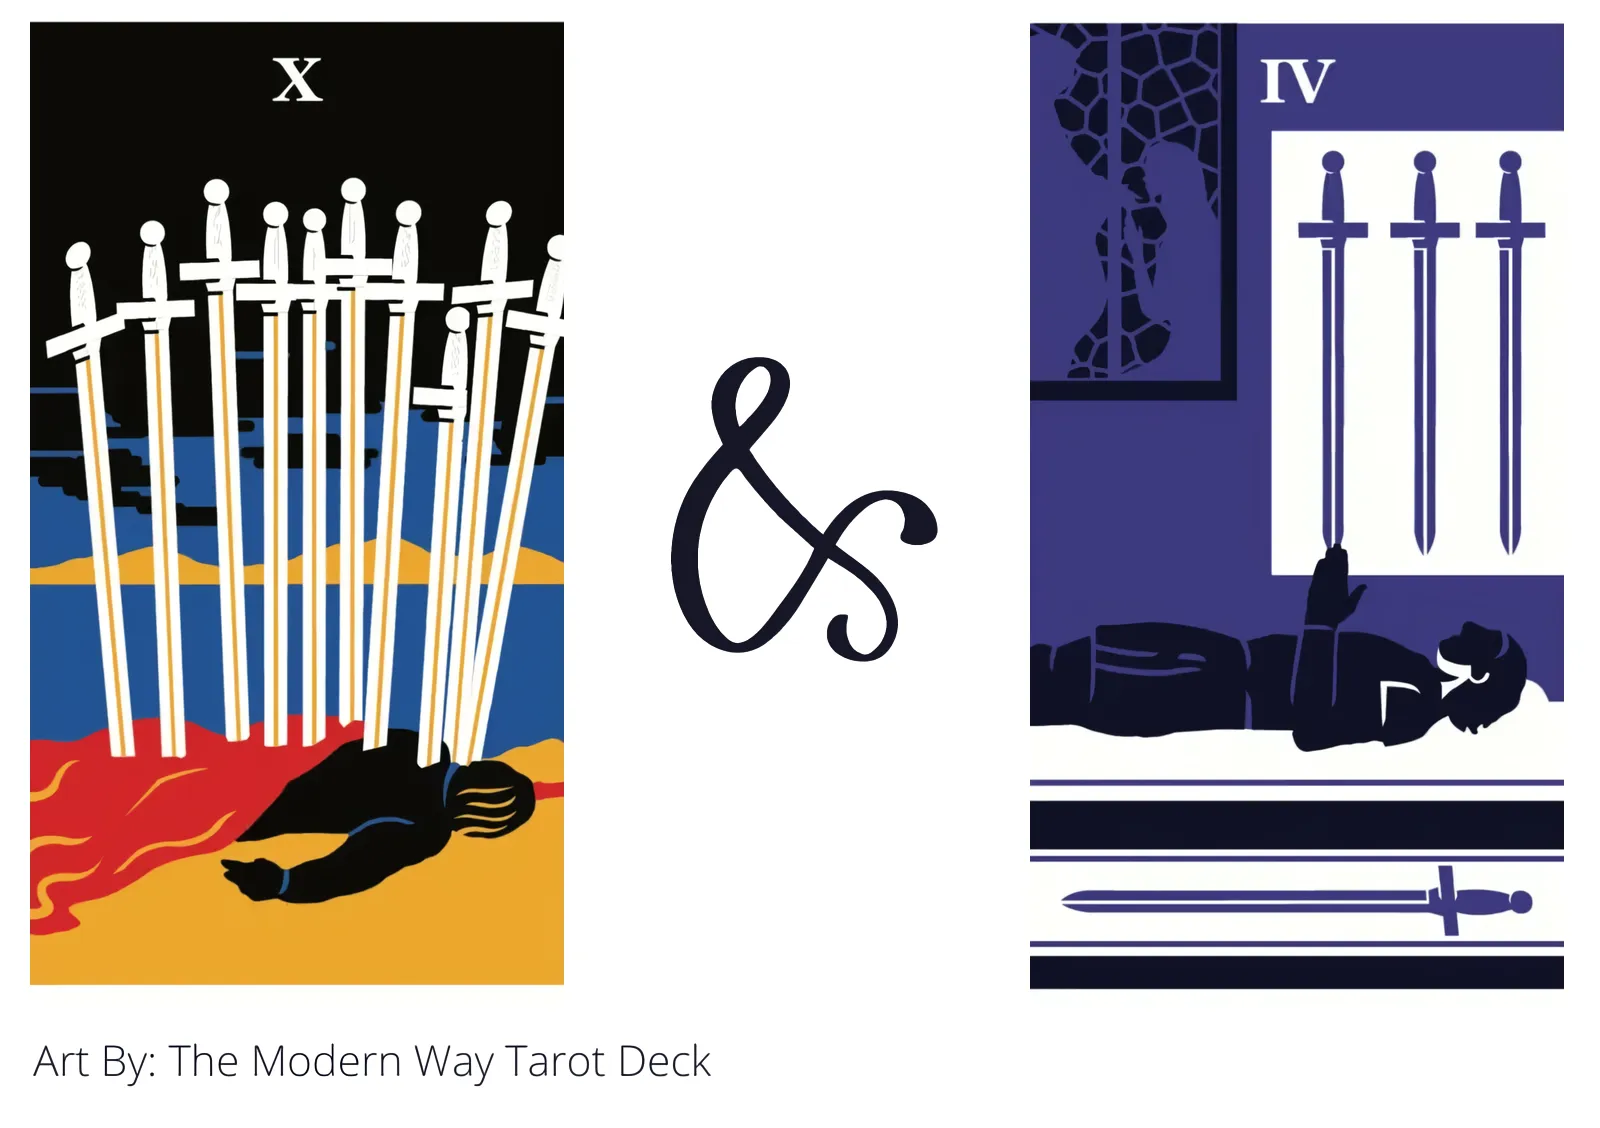 ten of swords and four of swords tarot cards together